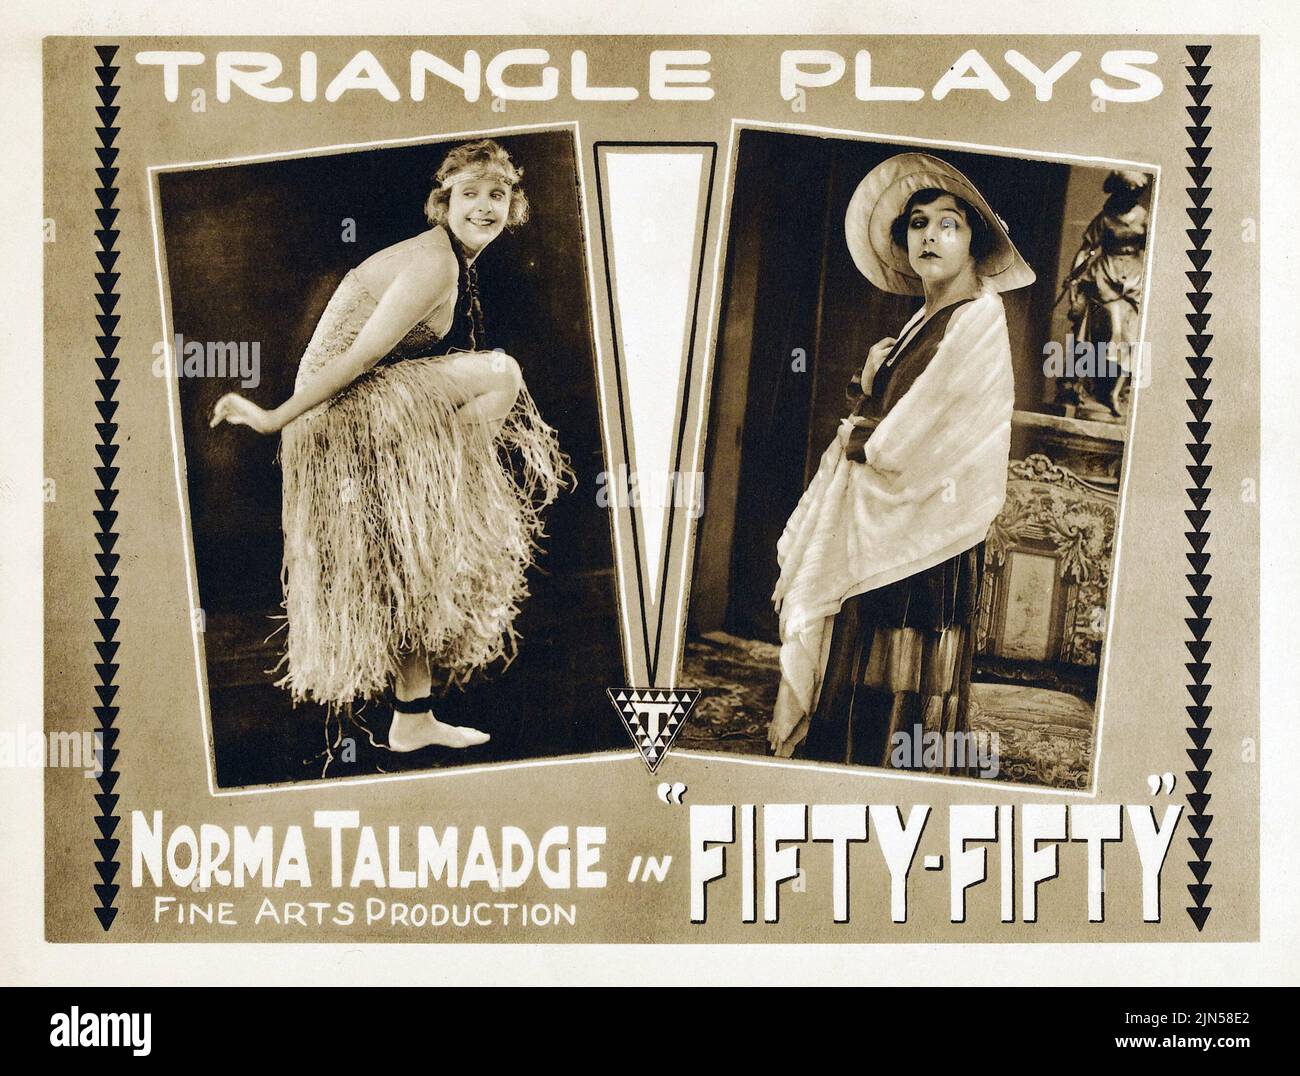 Norma Talmadge - Fifty-Fifty (Triangle Plays, 1916). Title Lobby Card Stock Photo